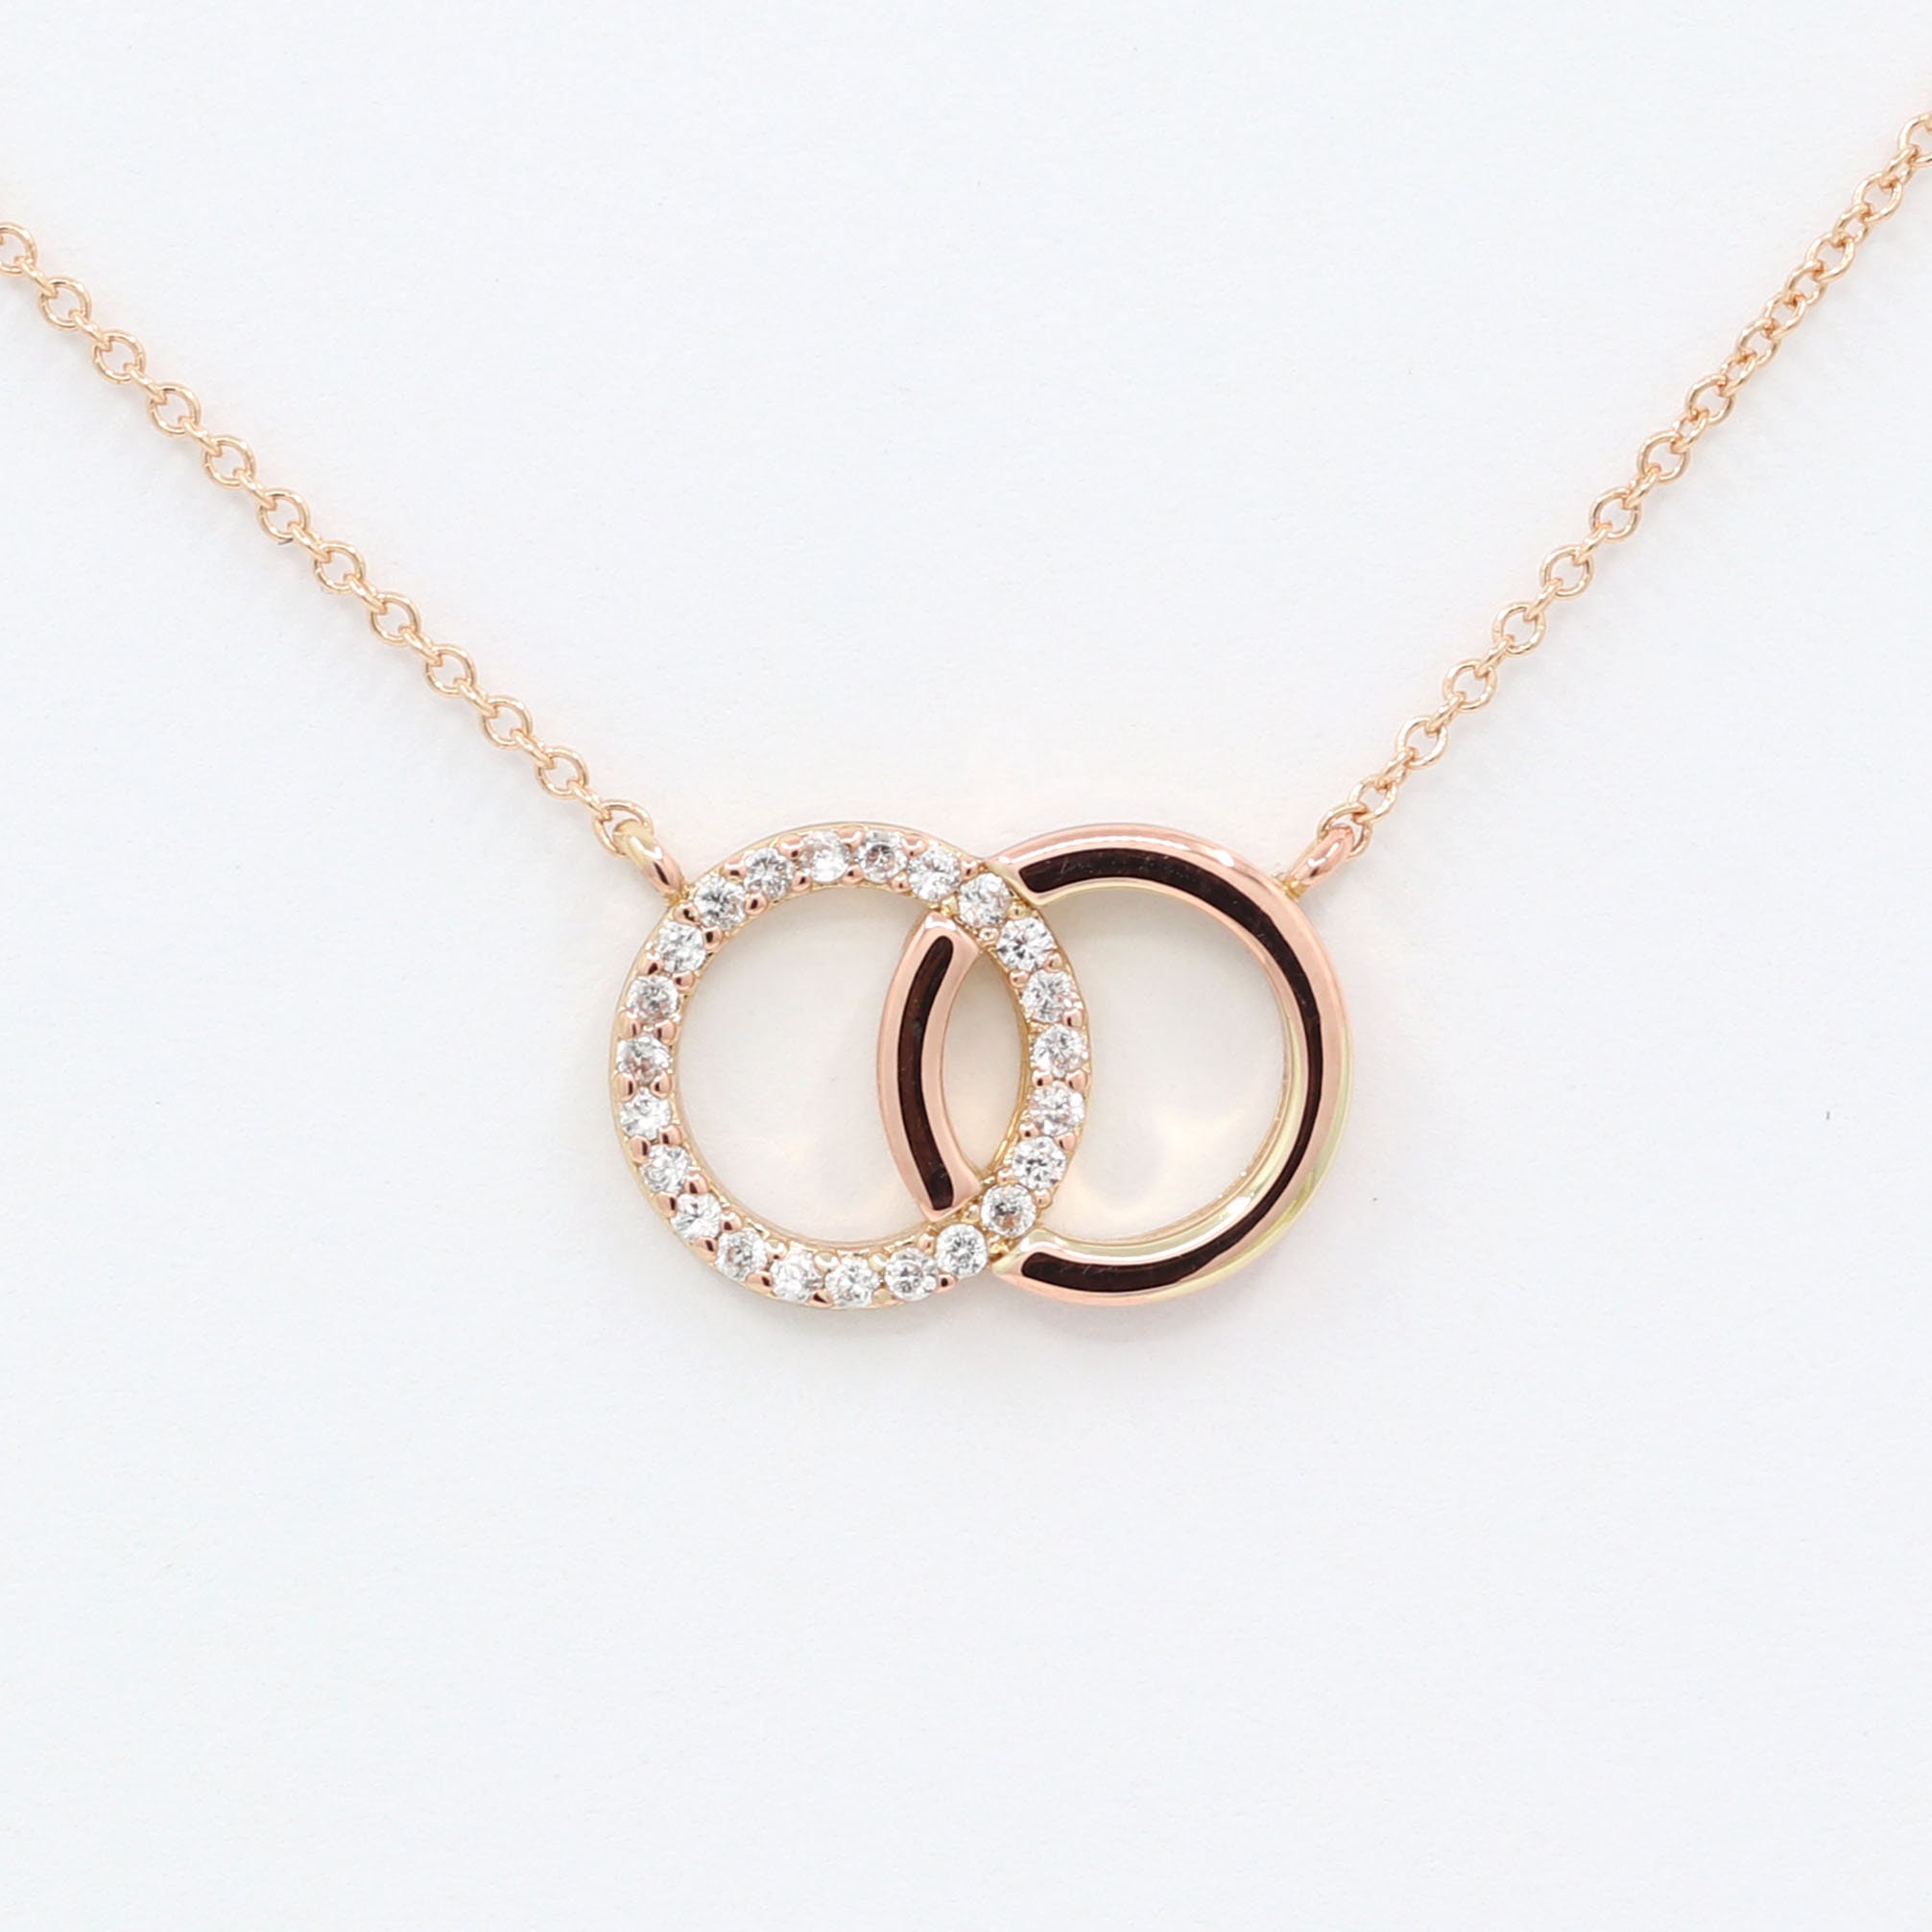 Buy Natural Diamond Circle Necklace, 14k Solid Gold Double Circle Necklace,  1.10mm Round Cut Diamond Pendant, April Birthstone Jewelry for Gift Online  in India - Etsy